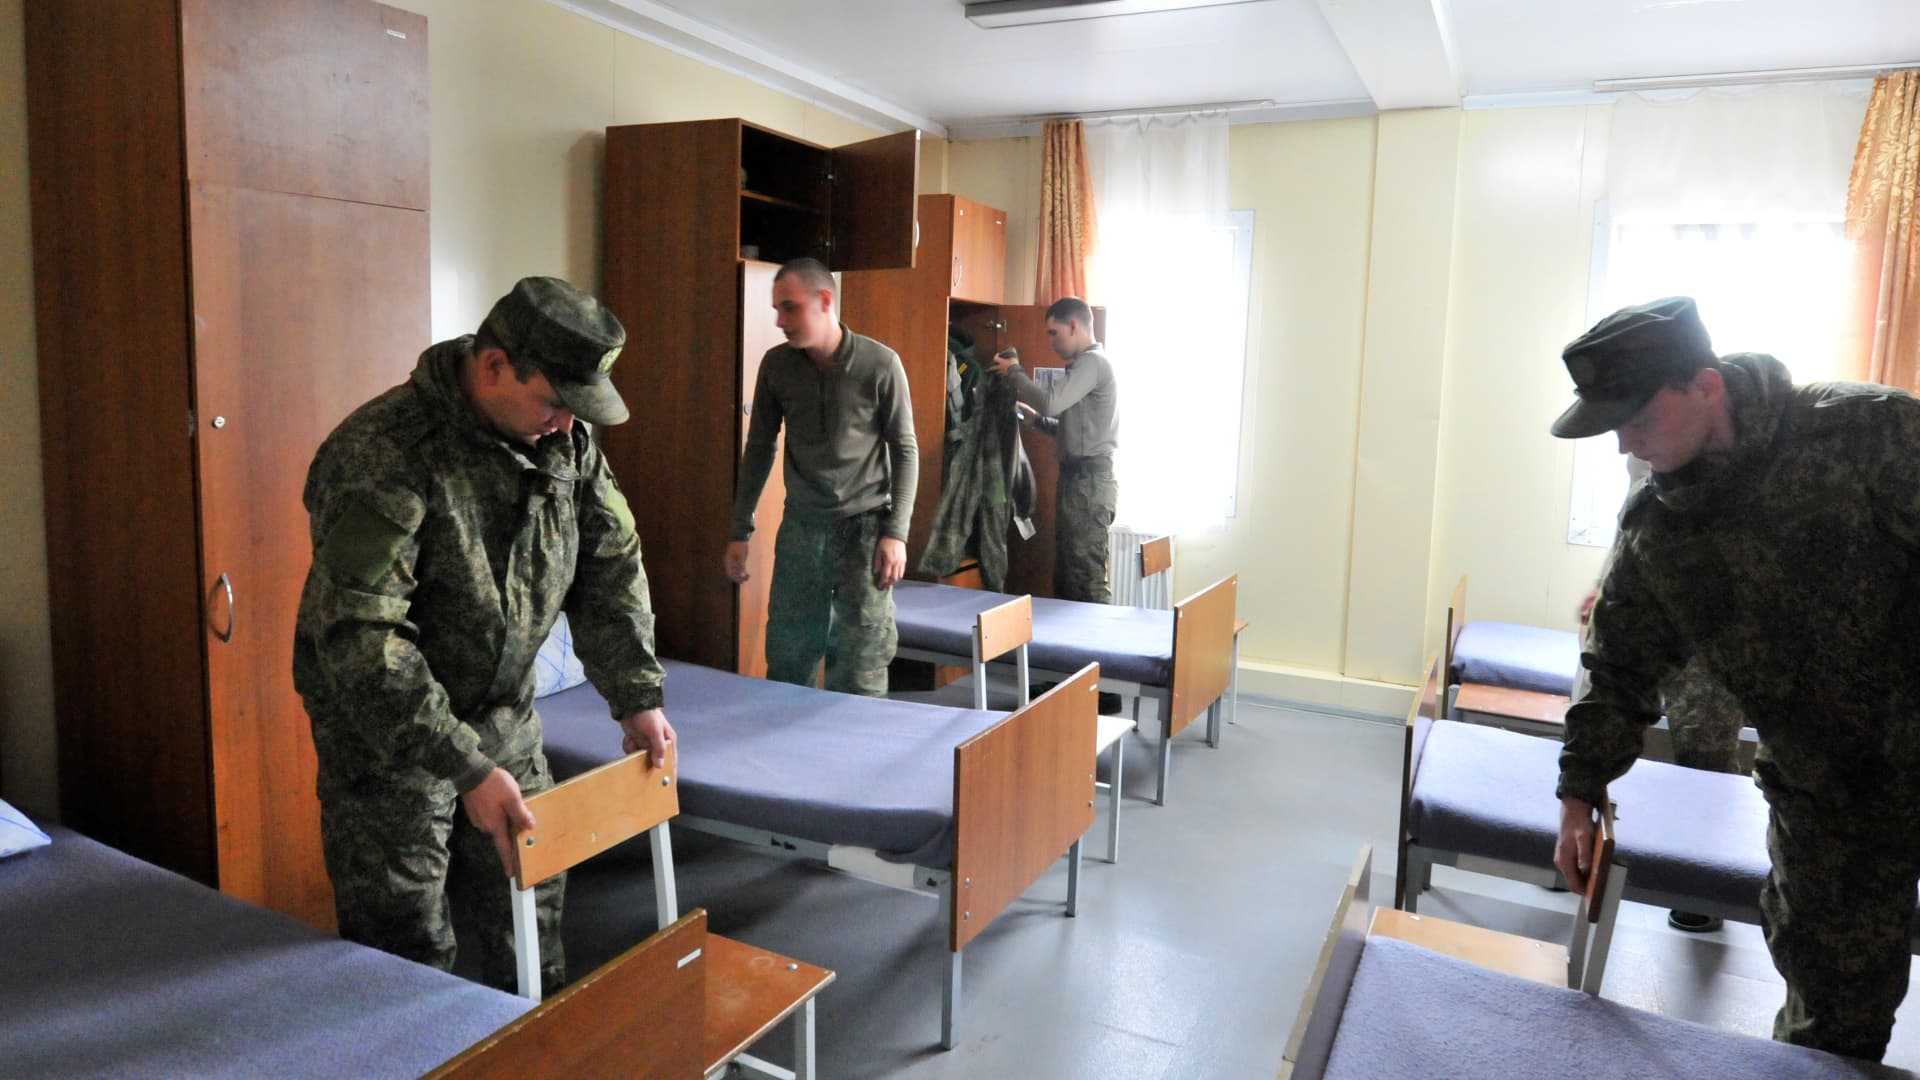 Russian citizens drafted during the partial mobilization begin their military trainings after a military call-up for the Russia-Ukraine war in Rostov, Russia on October 02, 2022.